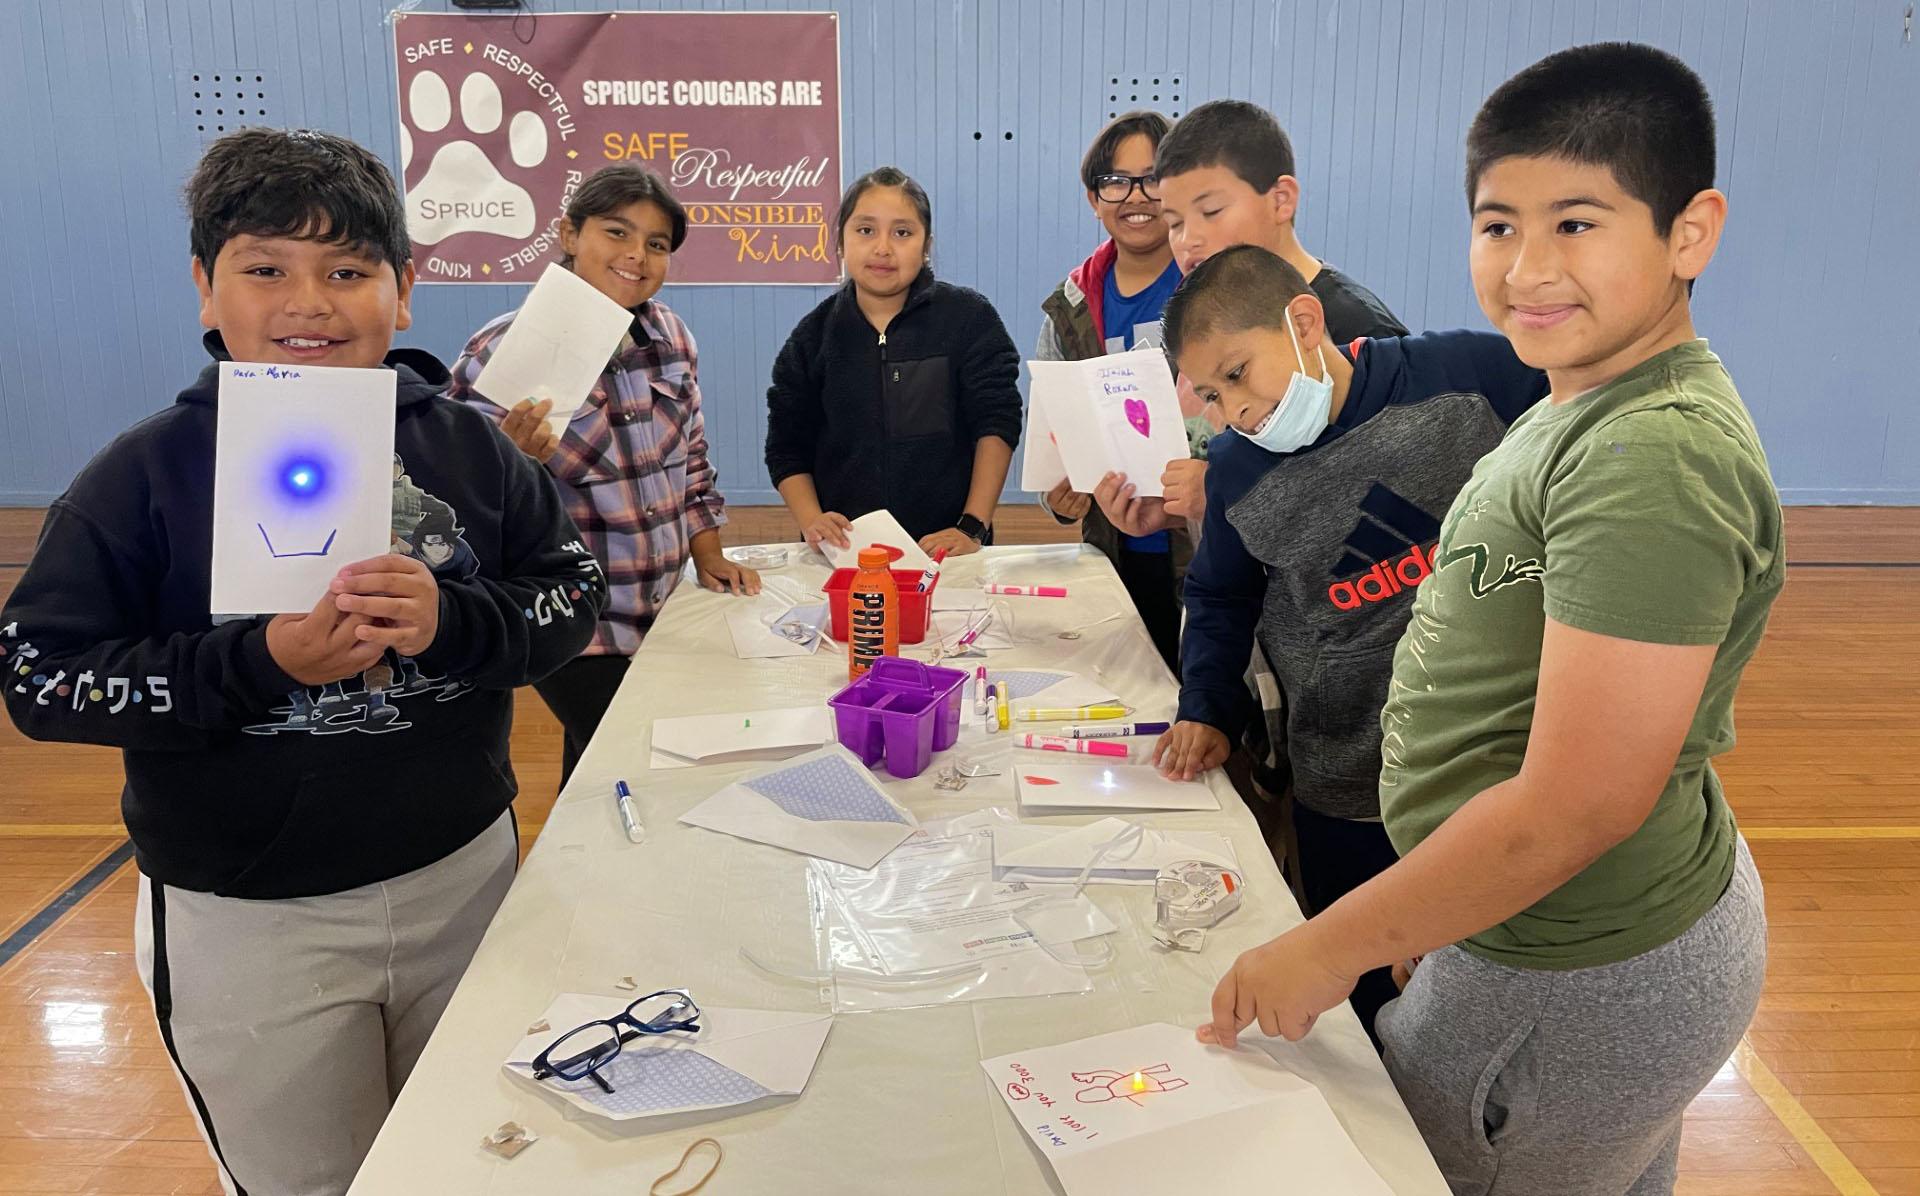 Spruce Elementary fifth graders make electrical circuits using paper during the school's science festival on May 12, 2023.